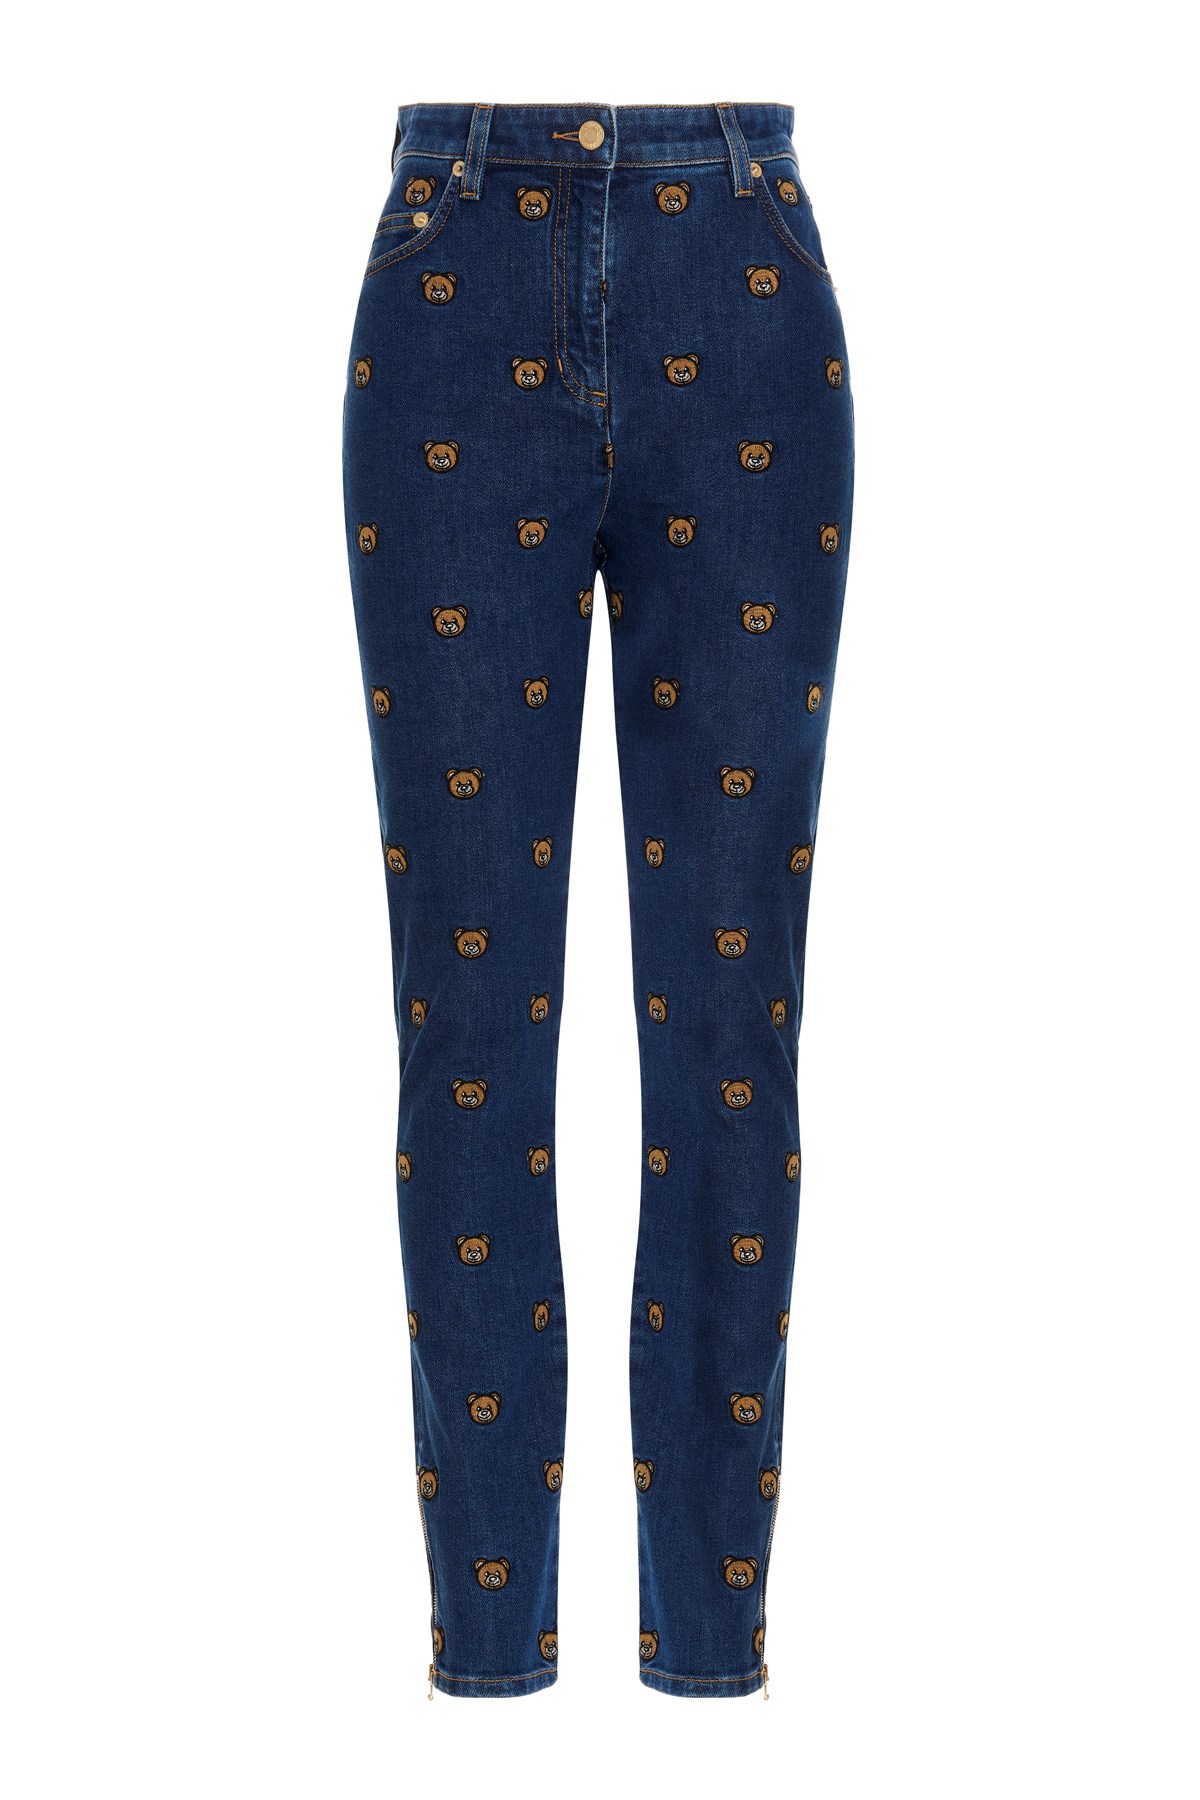 MOSCHINO 'Teddy’ Jeans